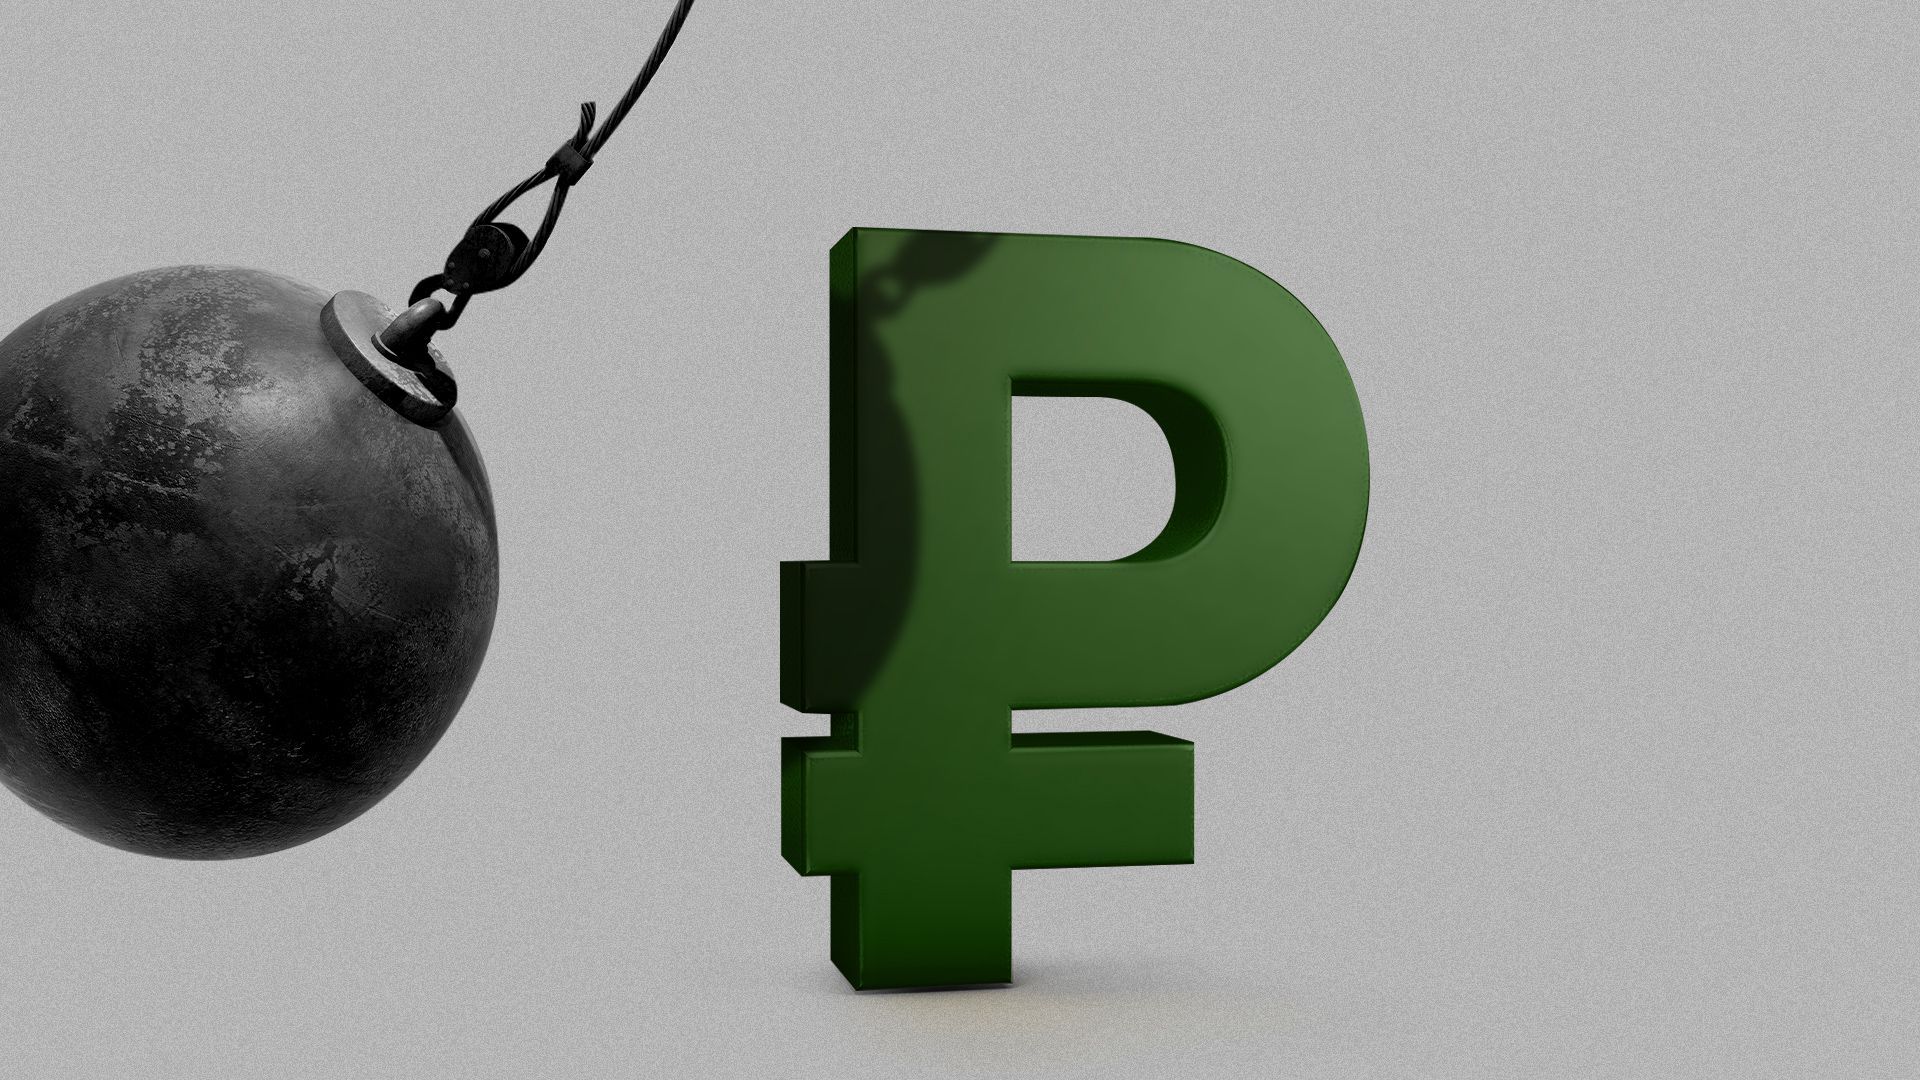 Illustration of a Ruble currency symbol about to be hit by a wrecking ball. 